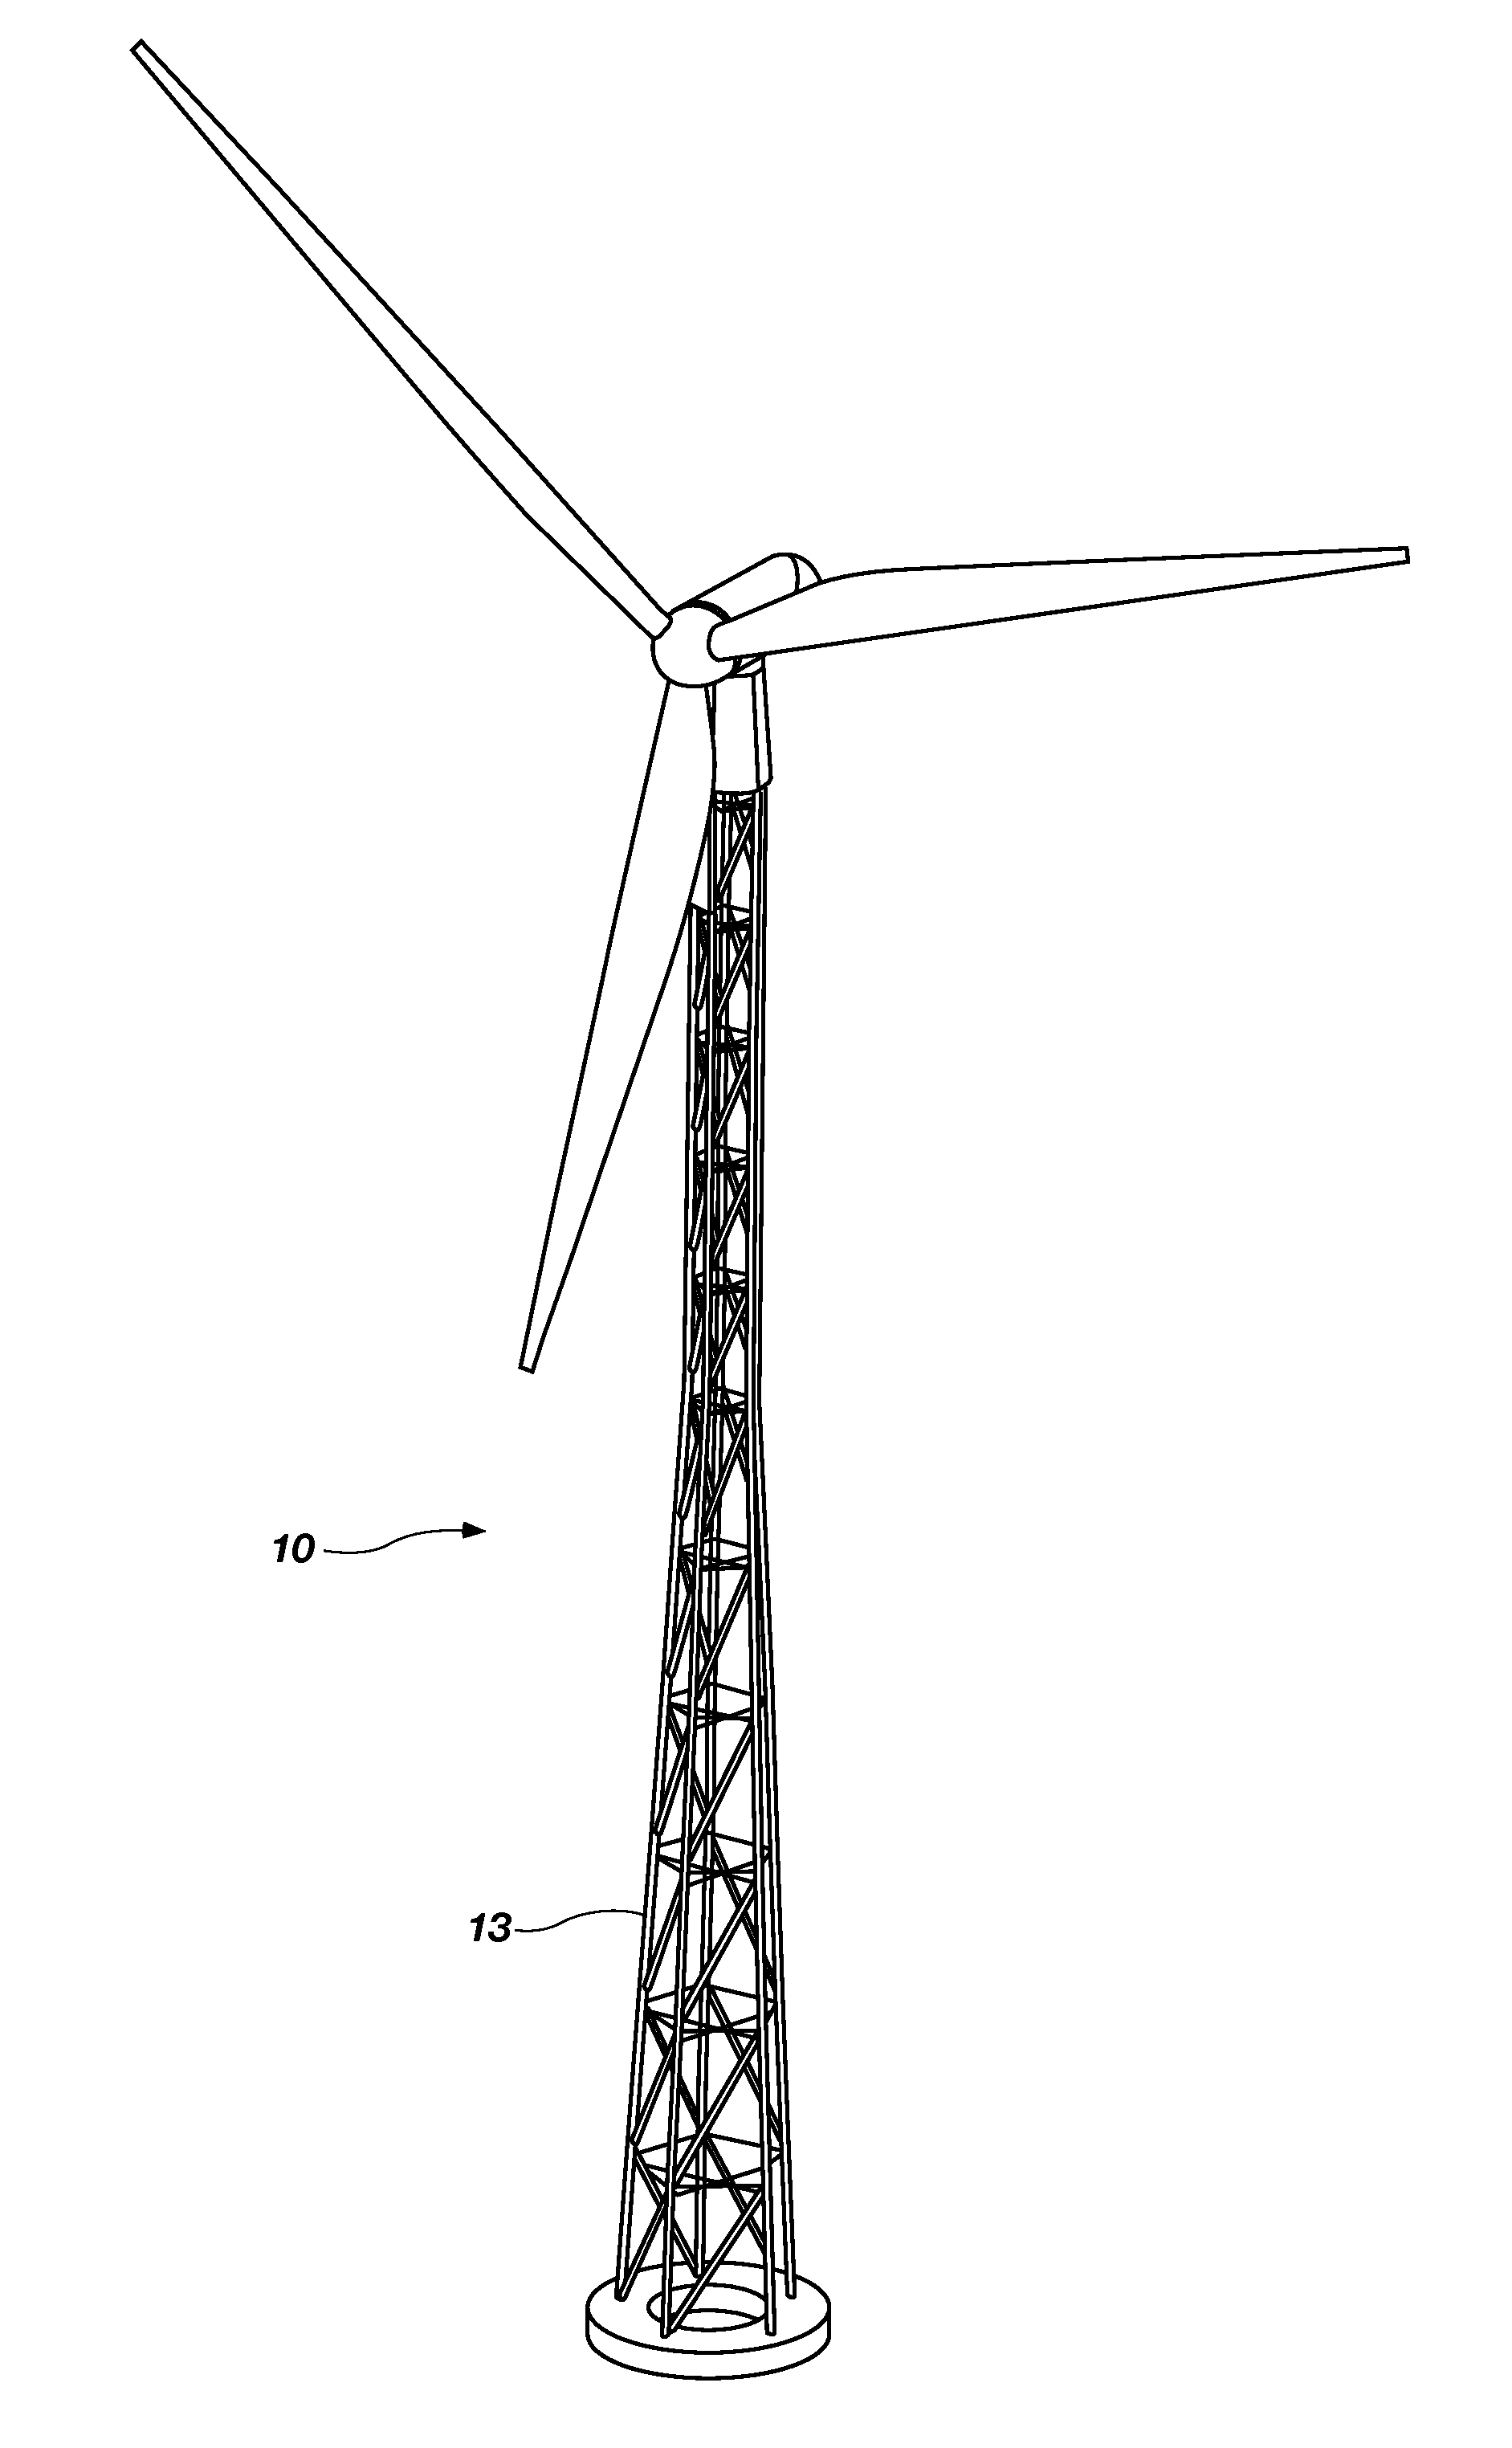 Structural shape for wind tower members